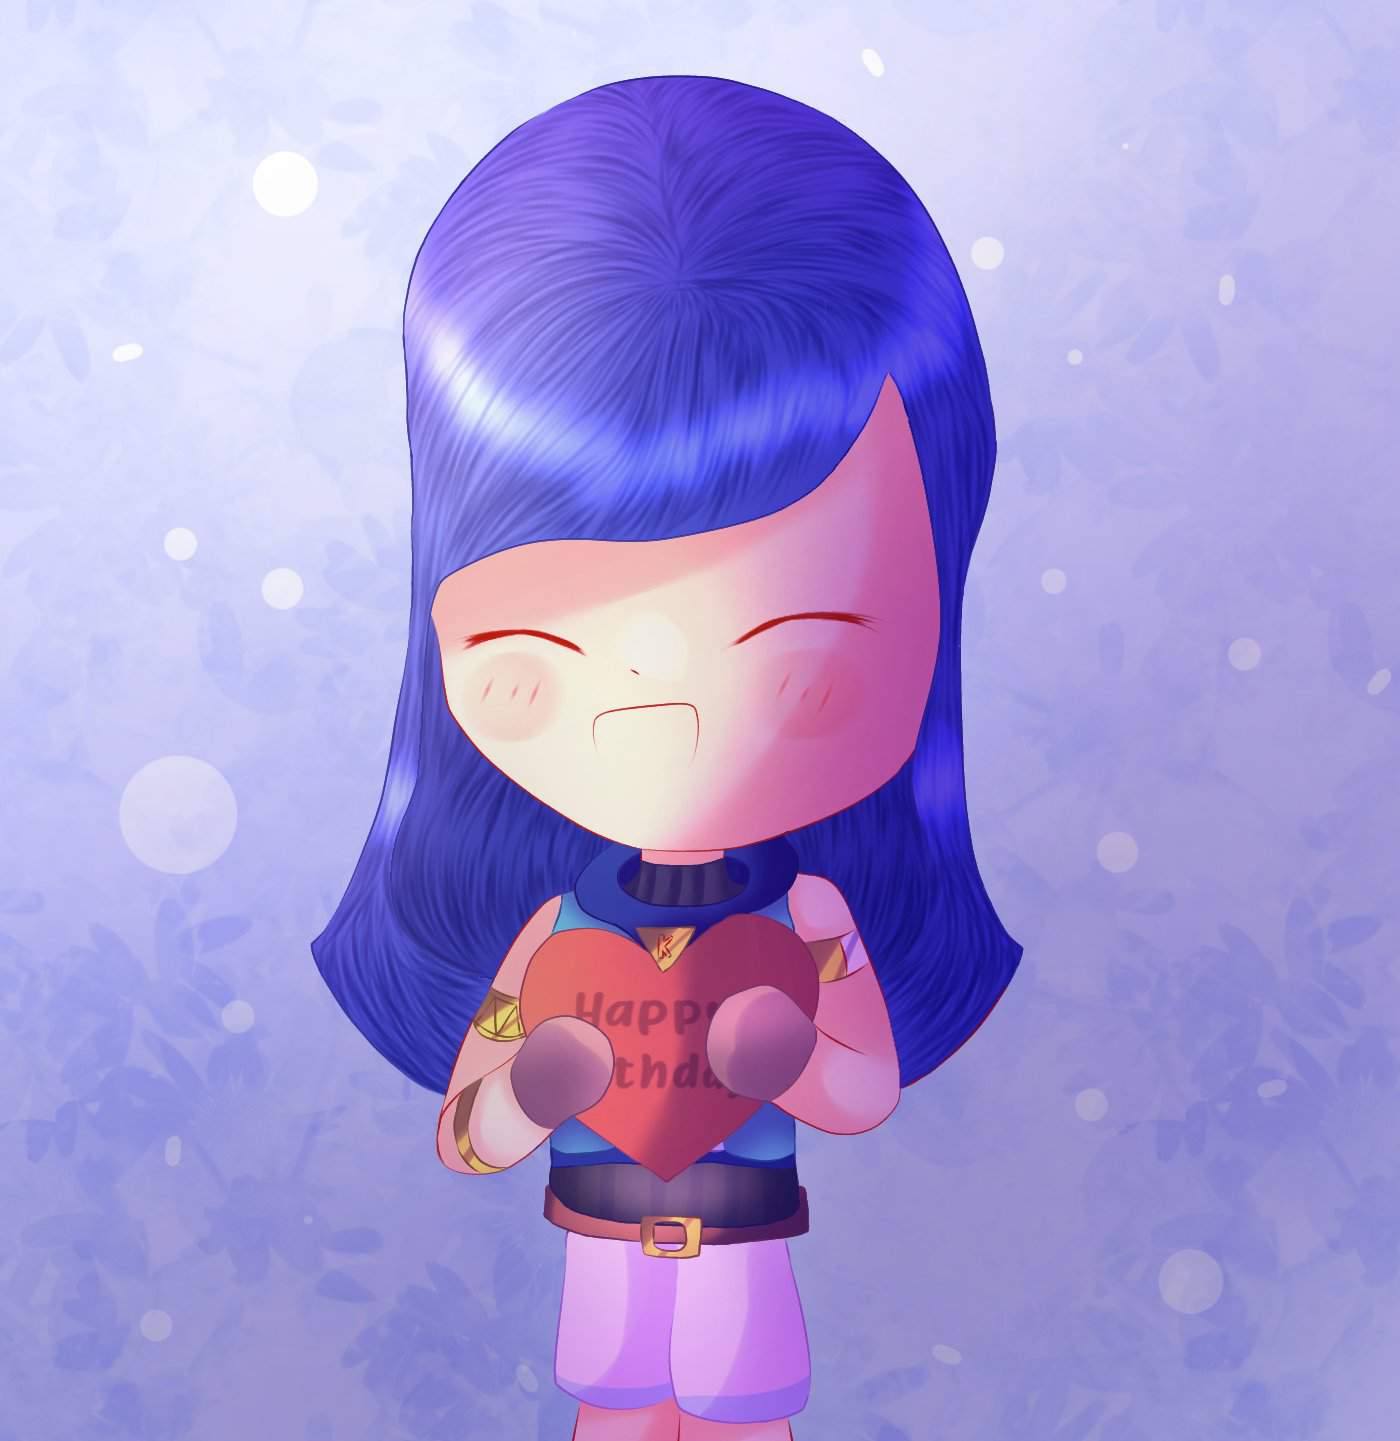 itsfunneh happy game